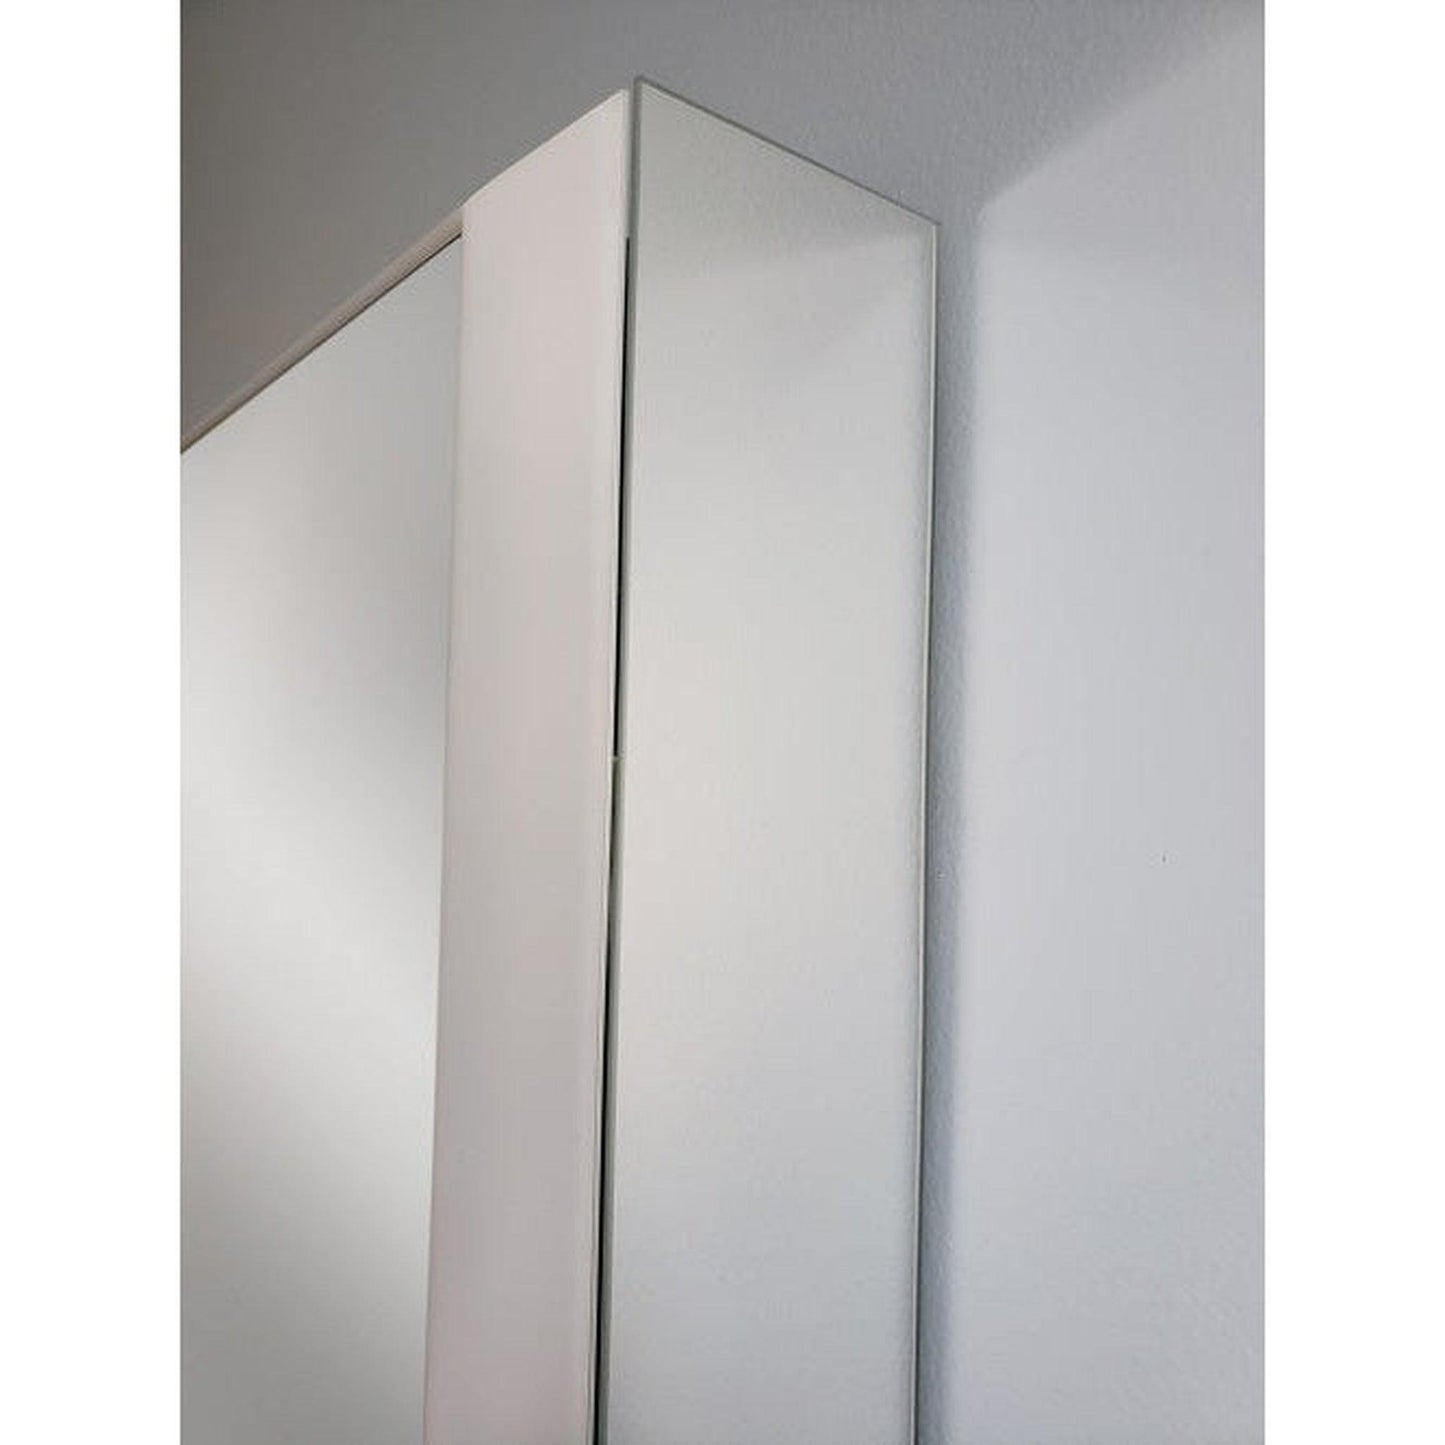 Sidler Quadro 47" x 36" 3000K 3 Mirror Doors Anodized Aluminum Medicine Cabinet With Night Light Function, Built-in GFCI Outlet and USB port